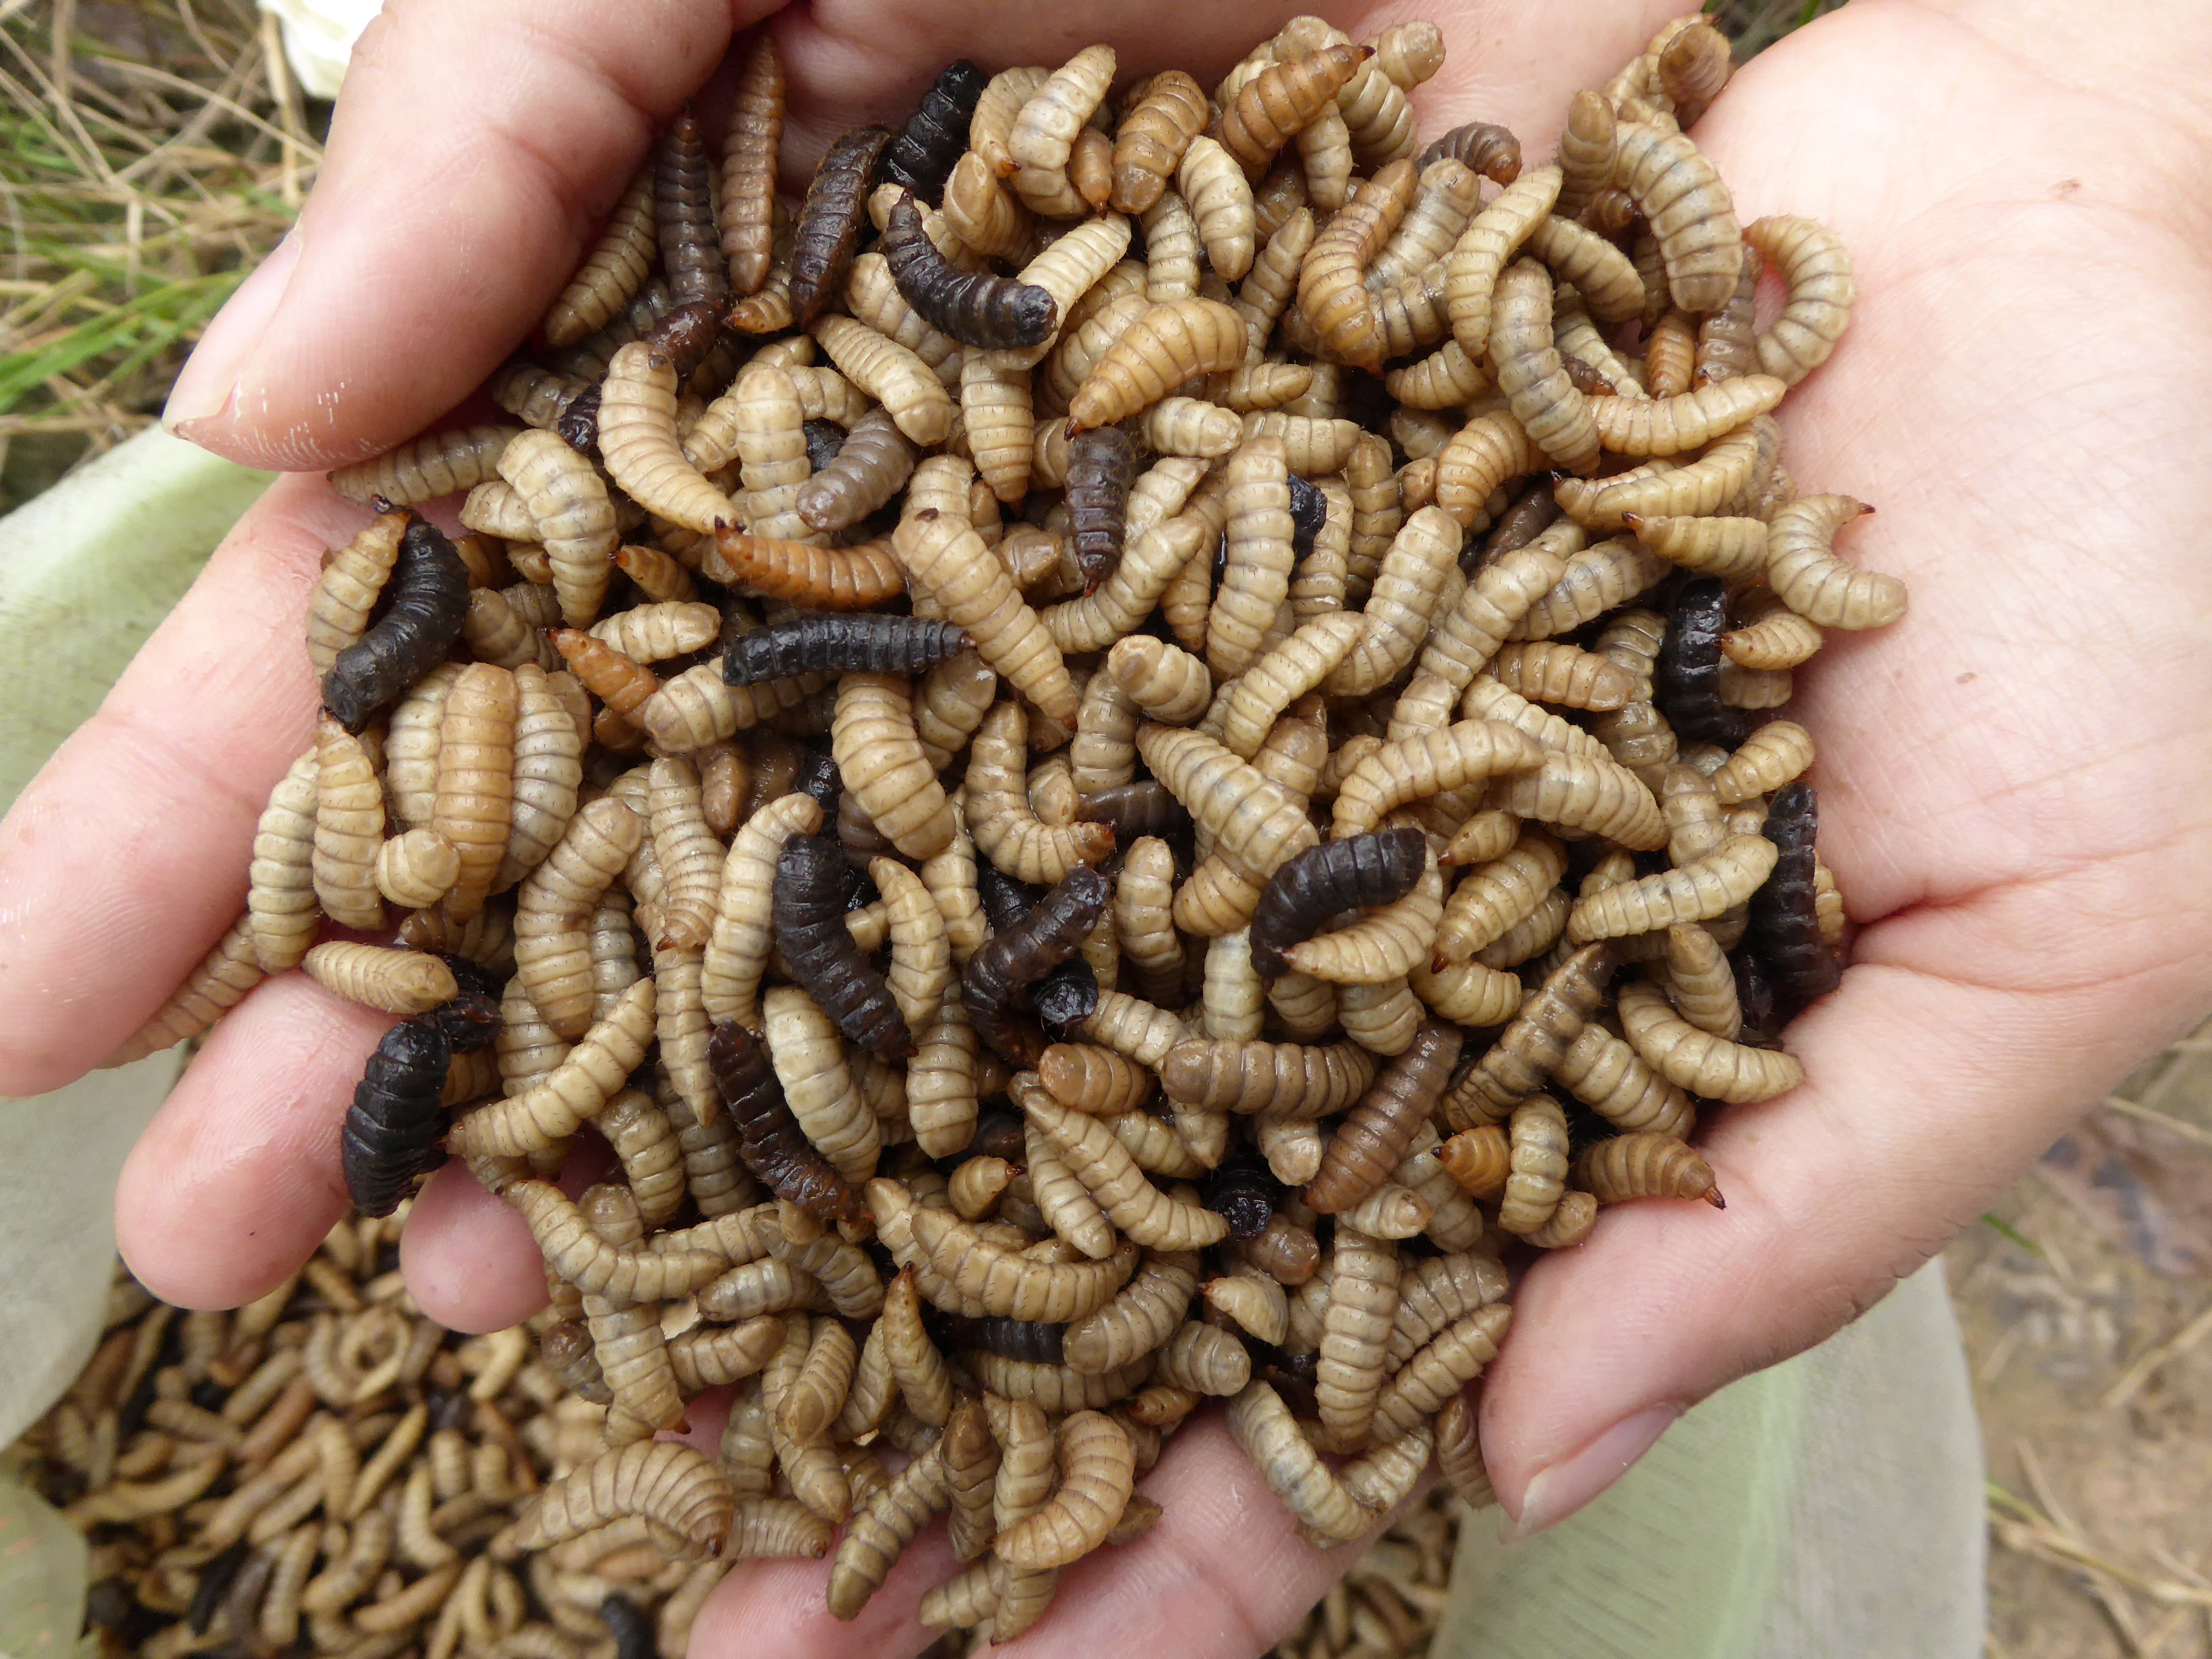 A handful of Black Soldier Fly larvae photographed in Malaysia